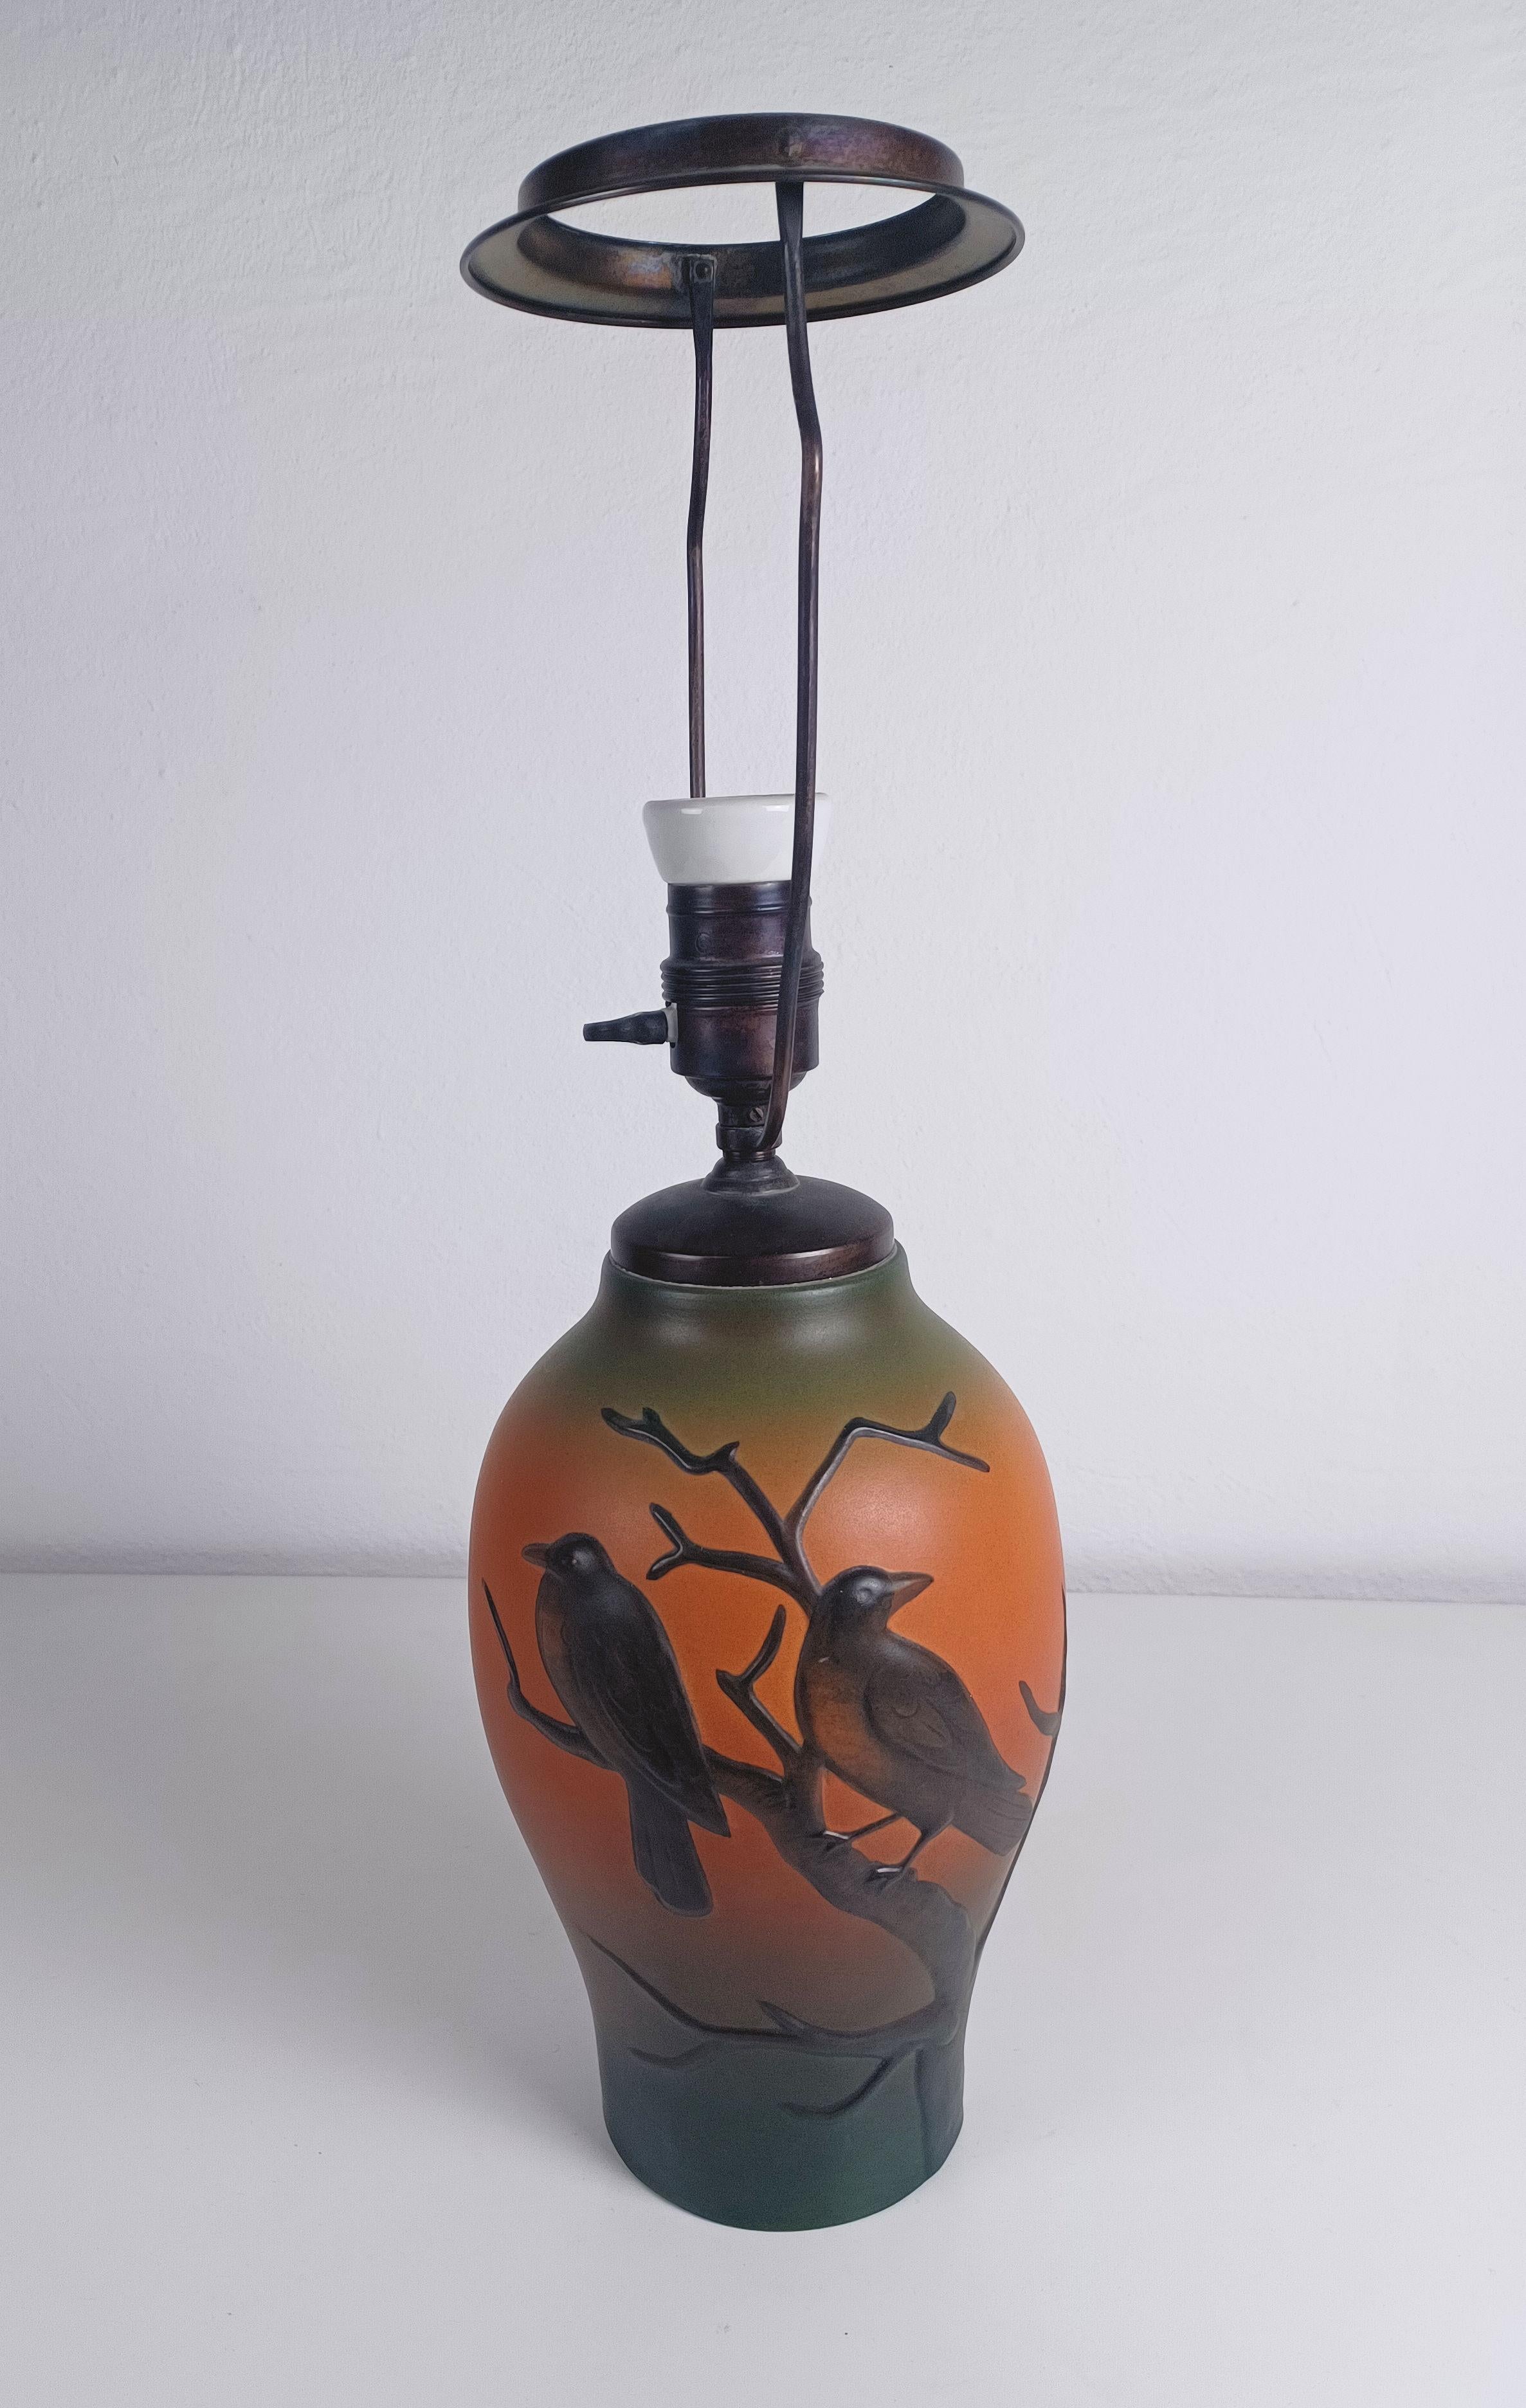 1920sArt Nouveau hand-crafted table lamp by Georg Thylstrup for P. Ipsens Enke

The hand-crafted art nouveau table lamp was designed by eorg Thylstrup in 1927 and feature  two craws sitting on a branch. 

The table lamp is in very good  vintage